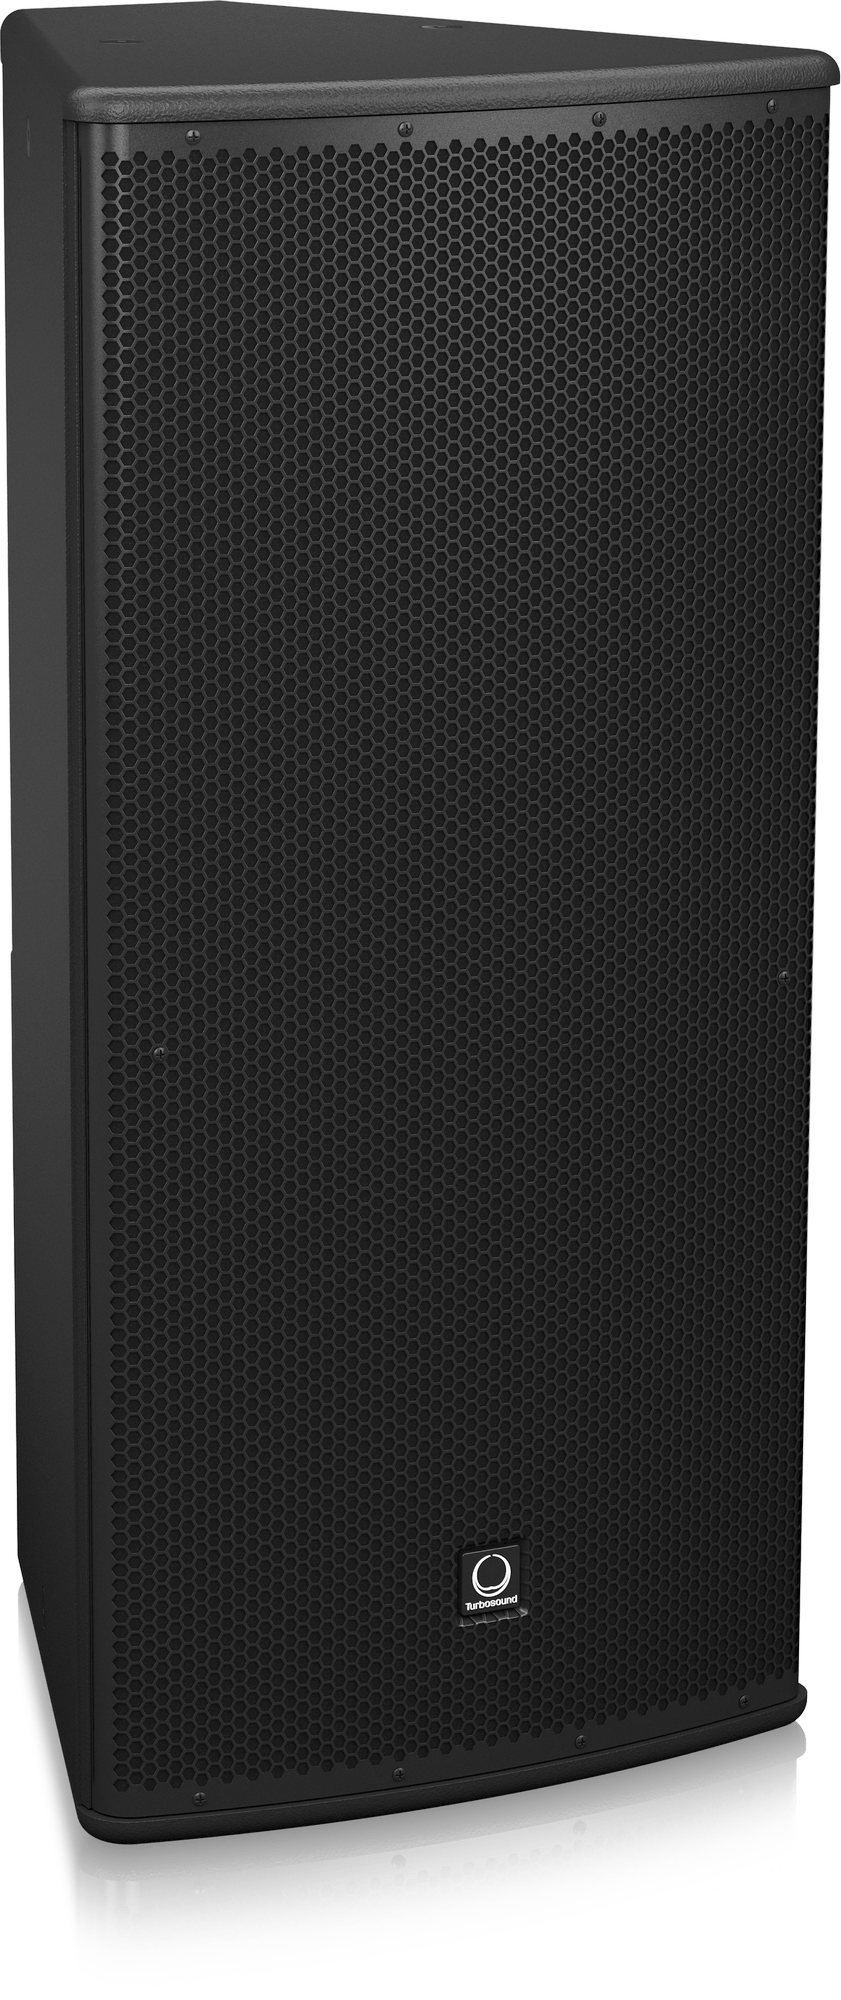 Turbosound athens tcs122 64 an frozy